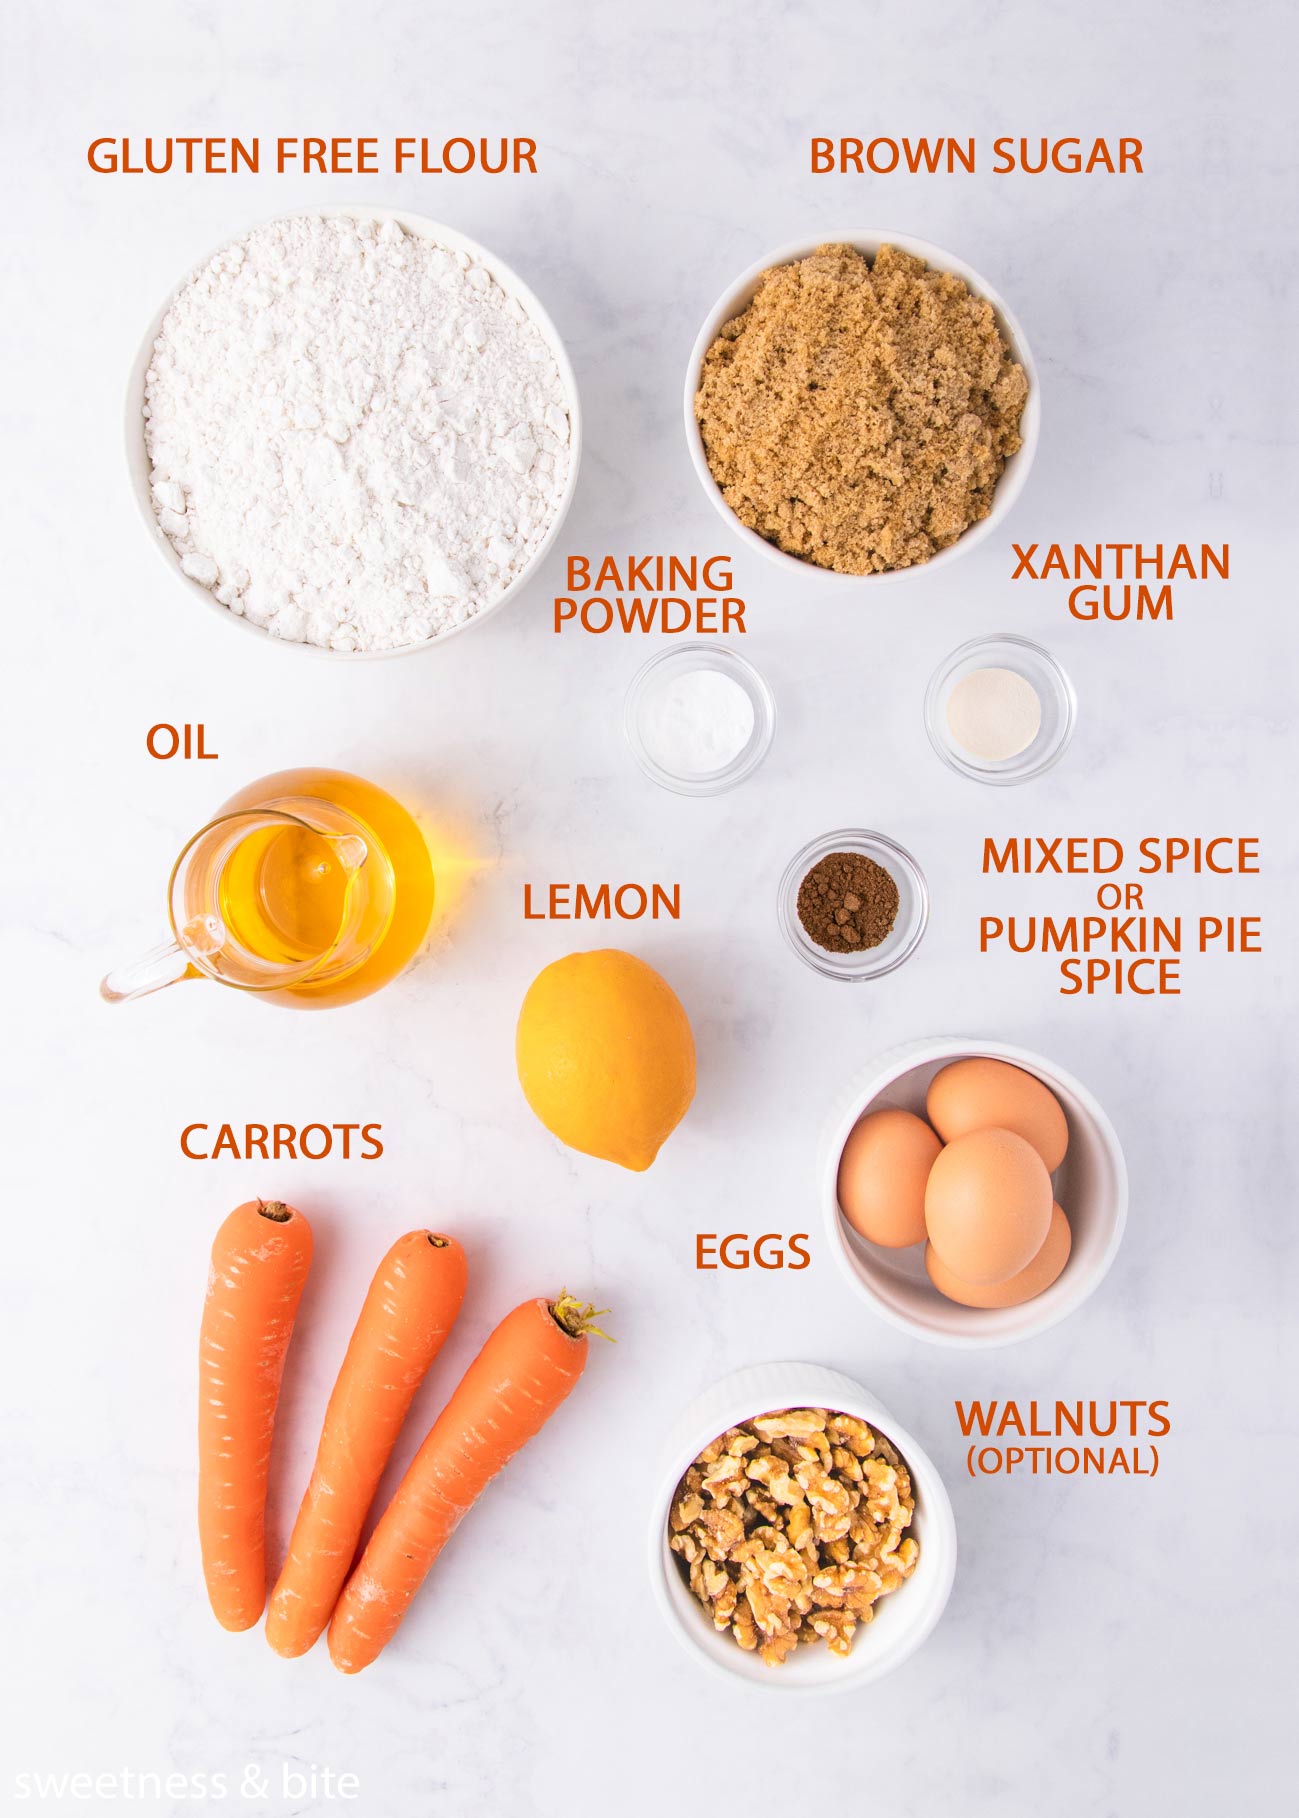 The gluten free carrot cake cupcake ingredients on a grey background with orange labels.